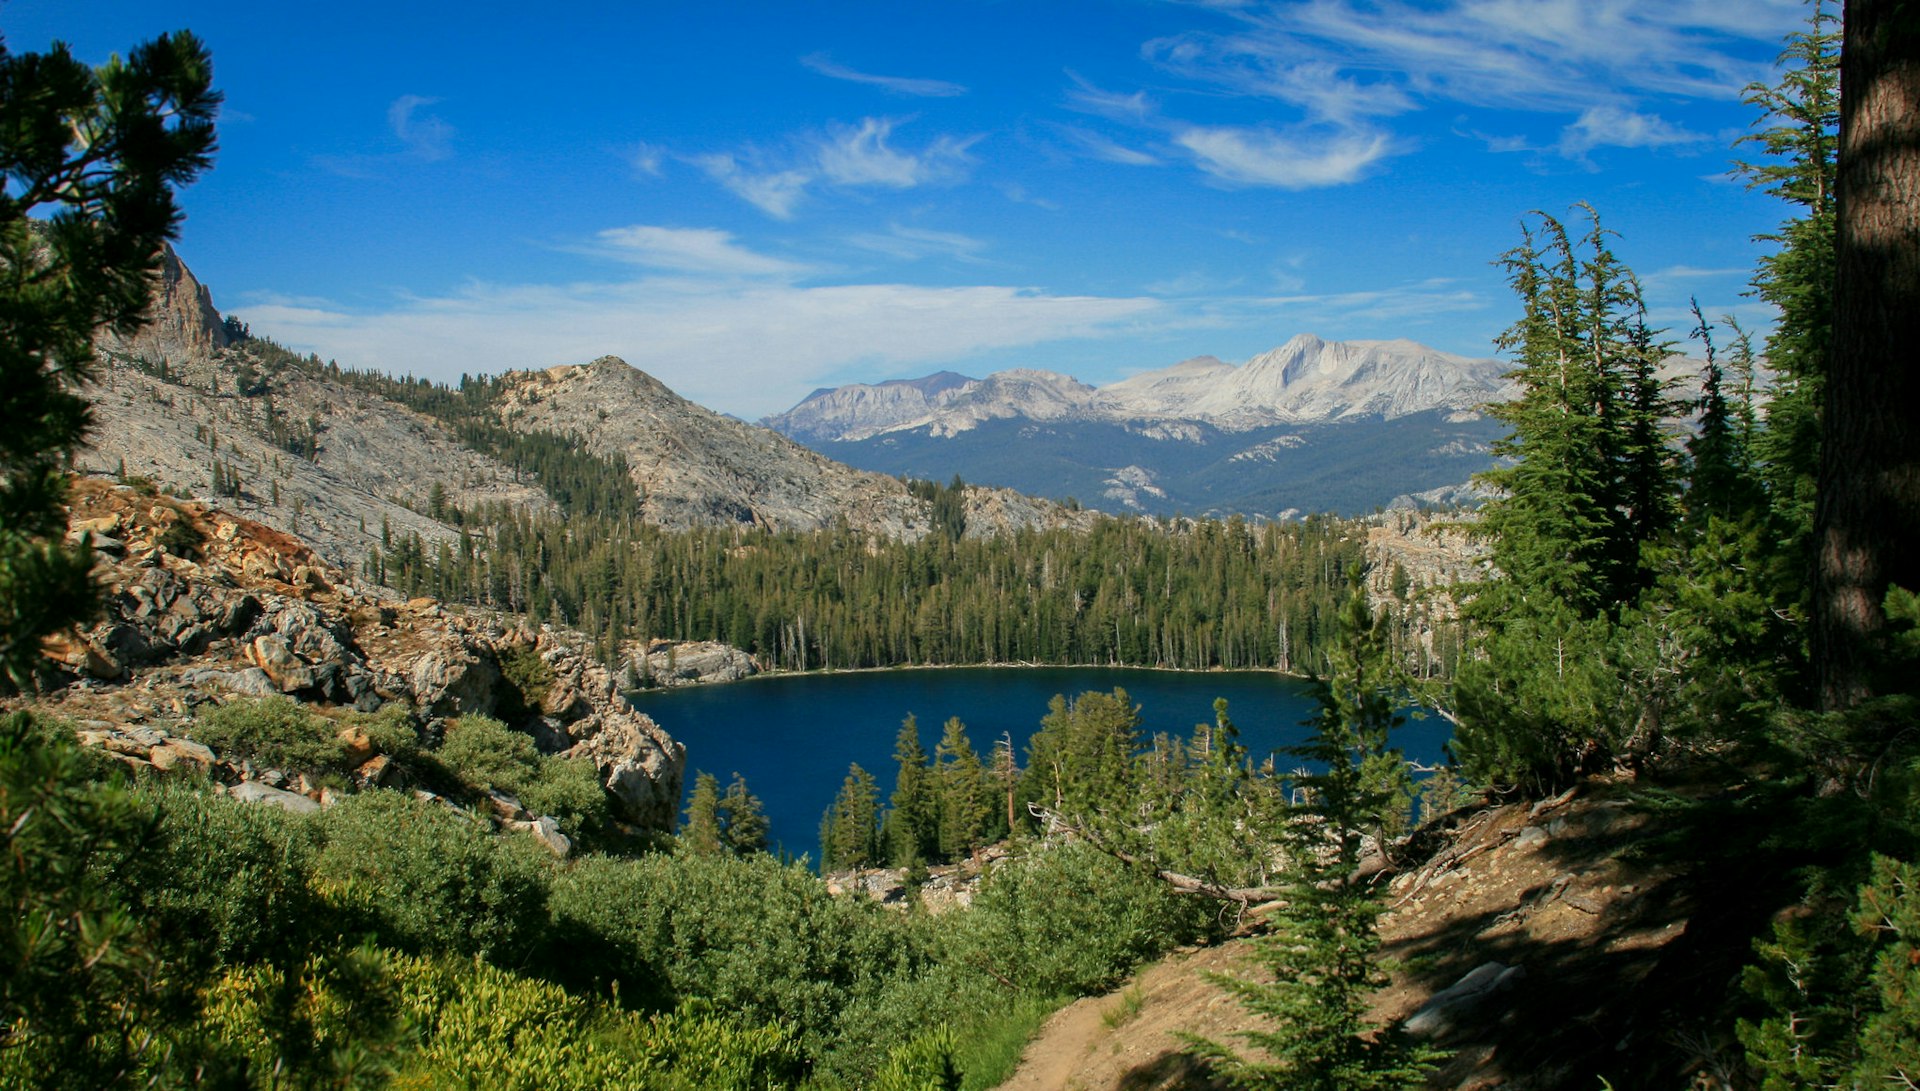 Lake May seen from the Mt Hoffman Trail. Image by au_ears / CC BY-SA 2.0